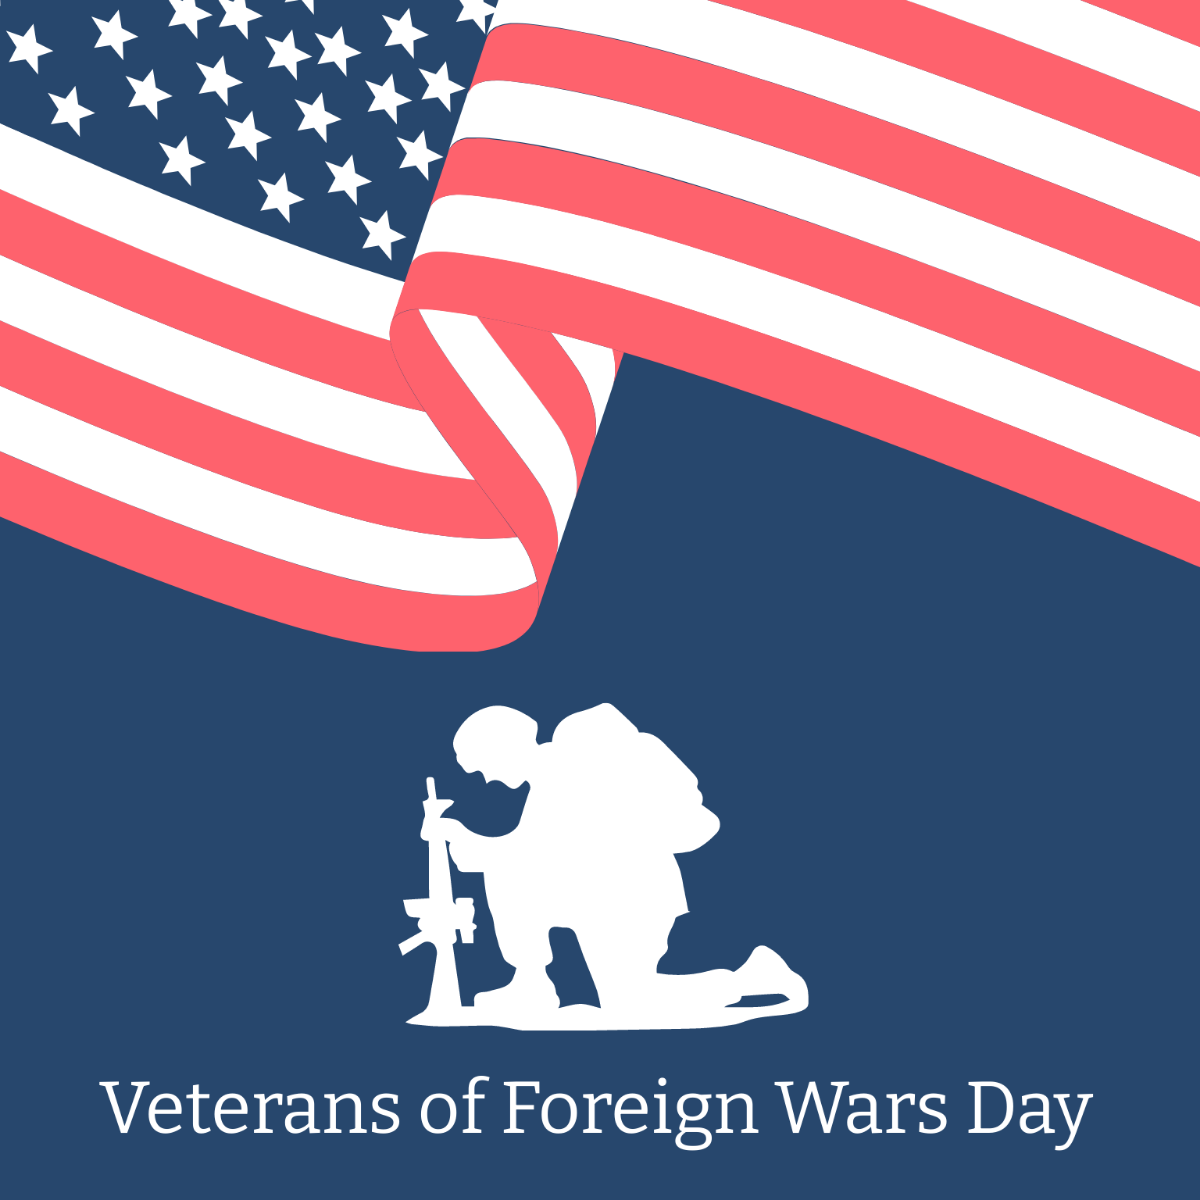 Free VFW Day Illustration Template